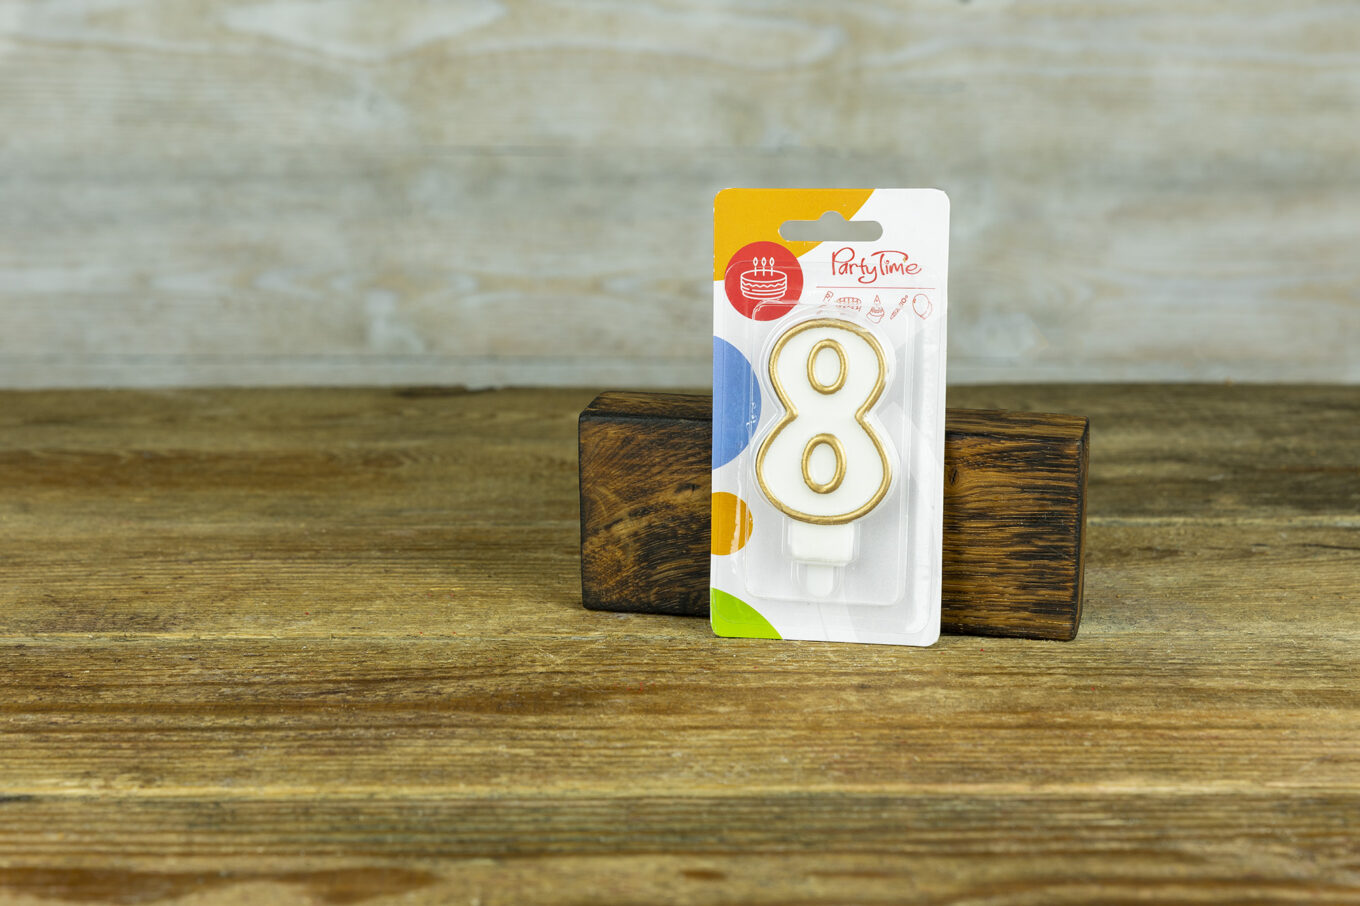 number 8 cake candle Cukiernia Jacek Placek is synonymous with the taste of homemade cakes made of natural products.